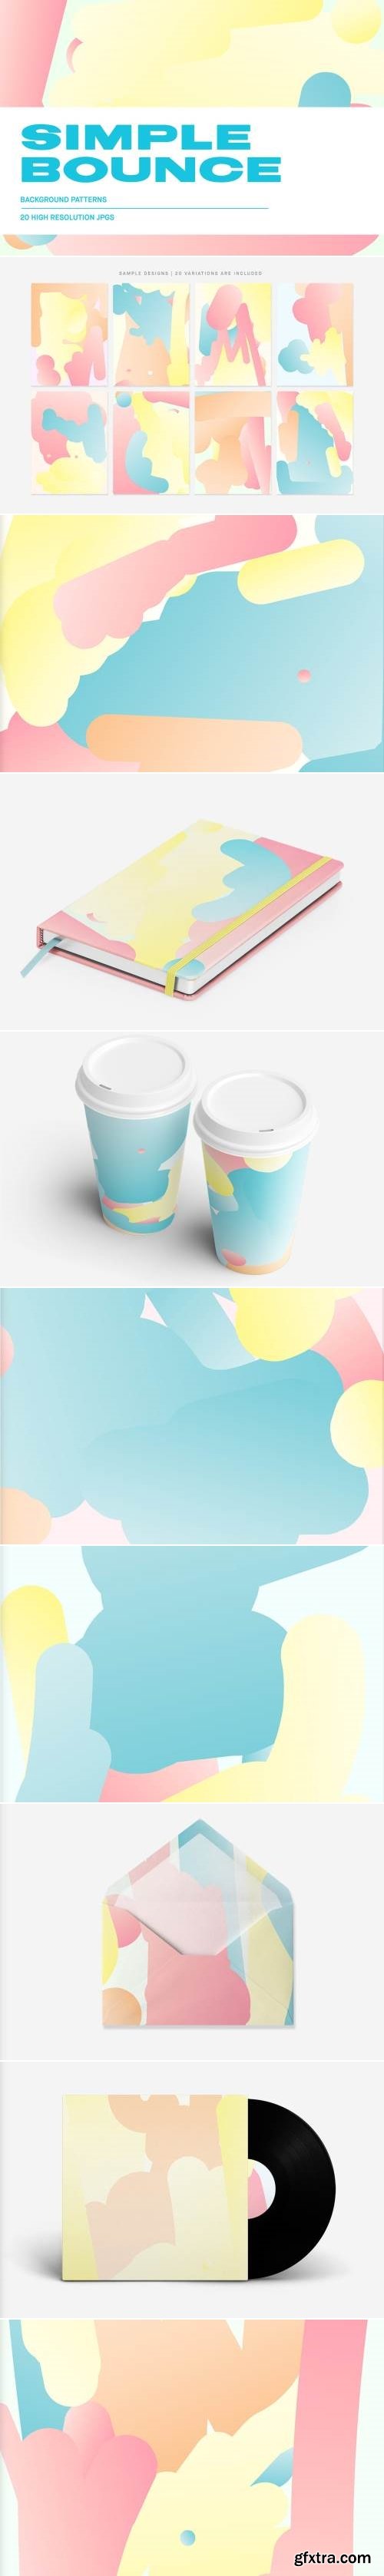 Simple Bounce - Pastel Backgrounds